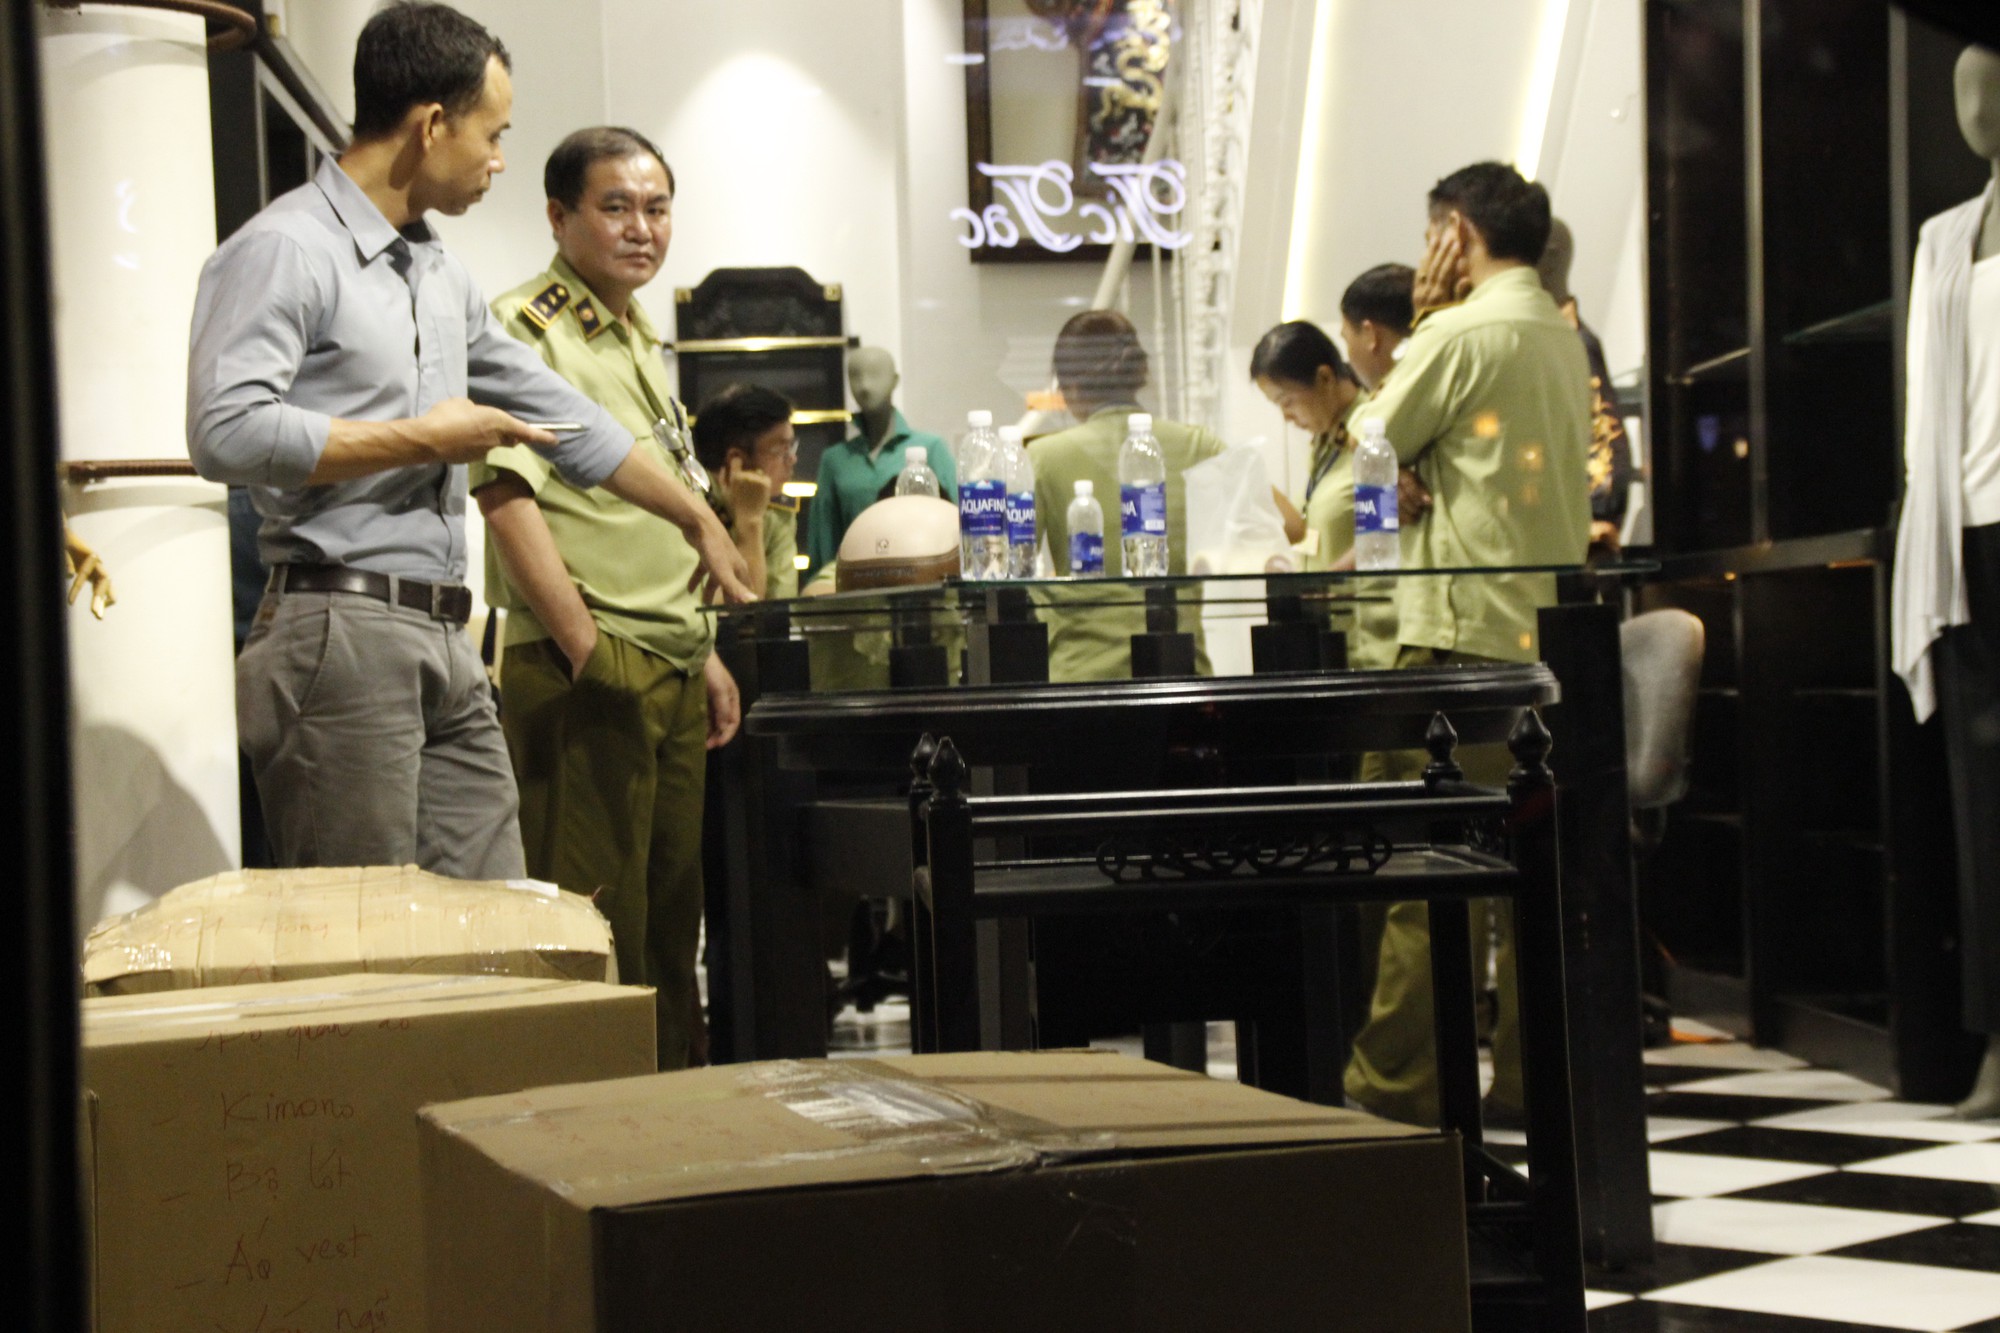 Authorities carry out the inspection at the store. Photo: Tuoi Tre